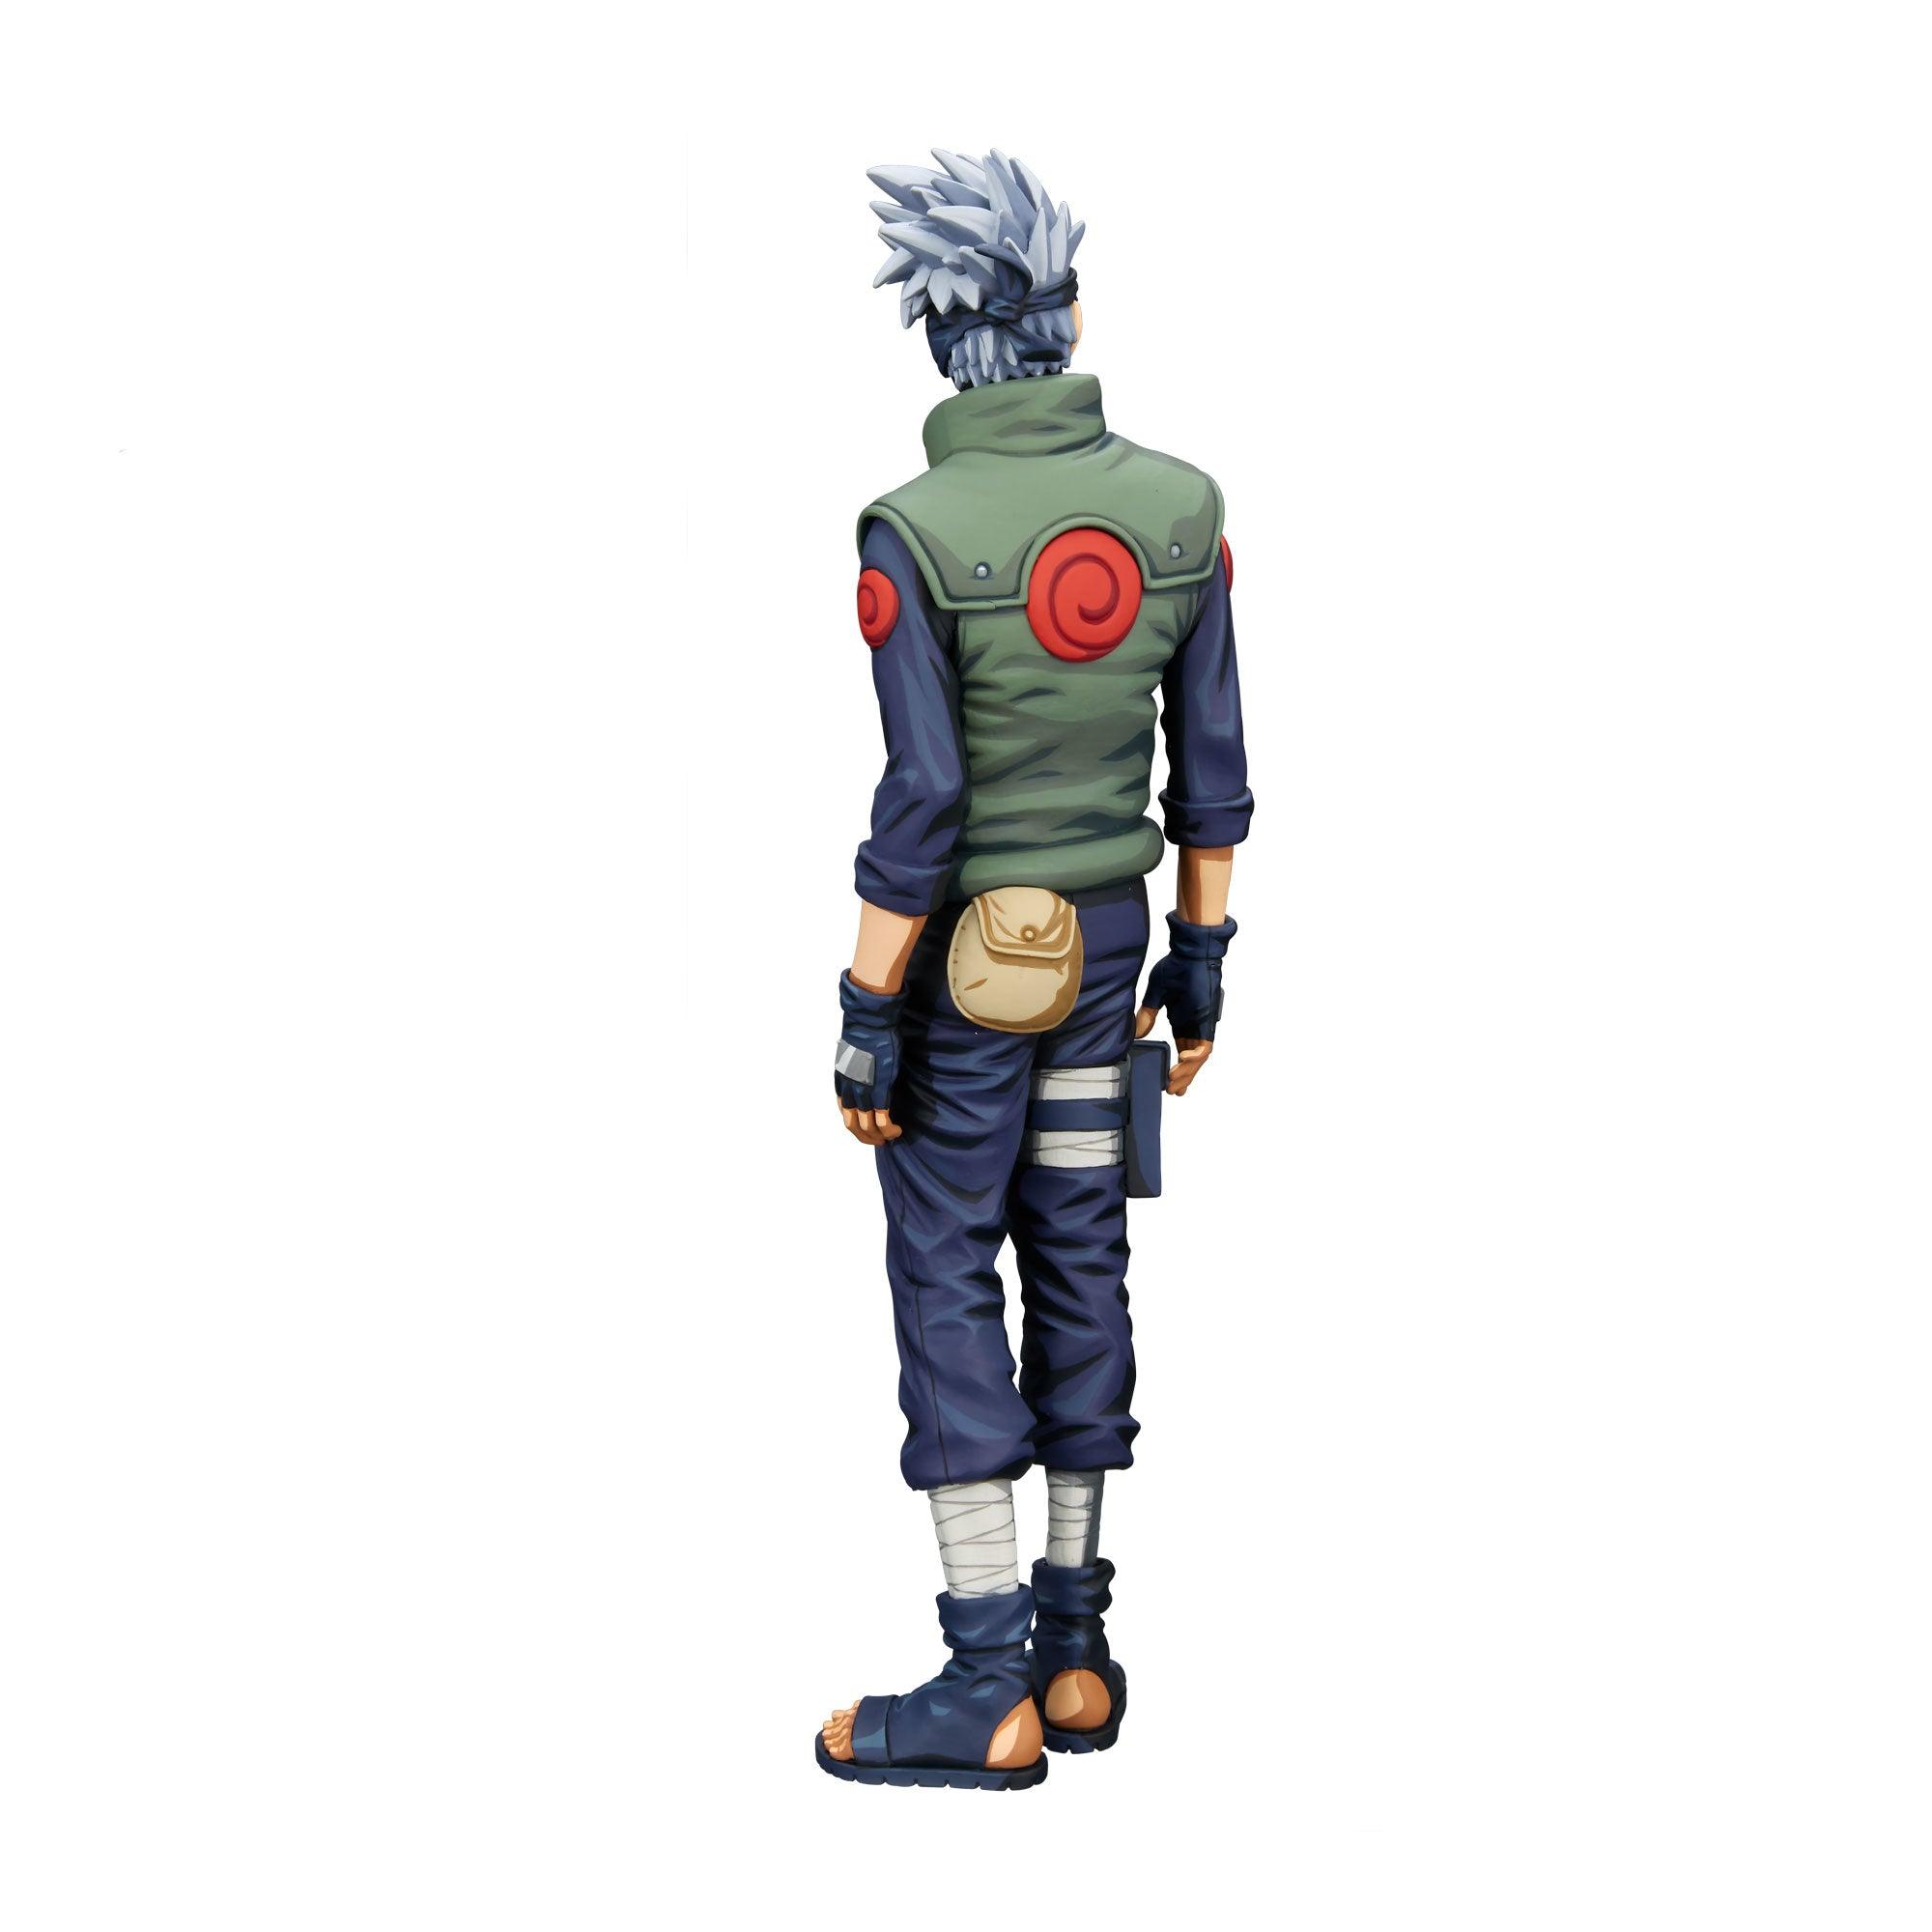 Retro Kakashi Naruto Anime Gifts For Fans Drawing by Anime Art - Fine Art  America, kakashi from naruto drawing - thirstymag.com